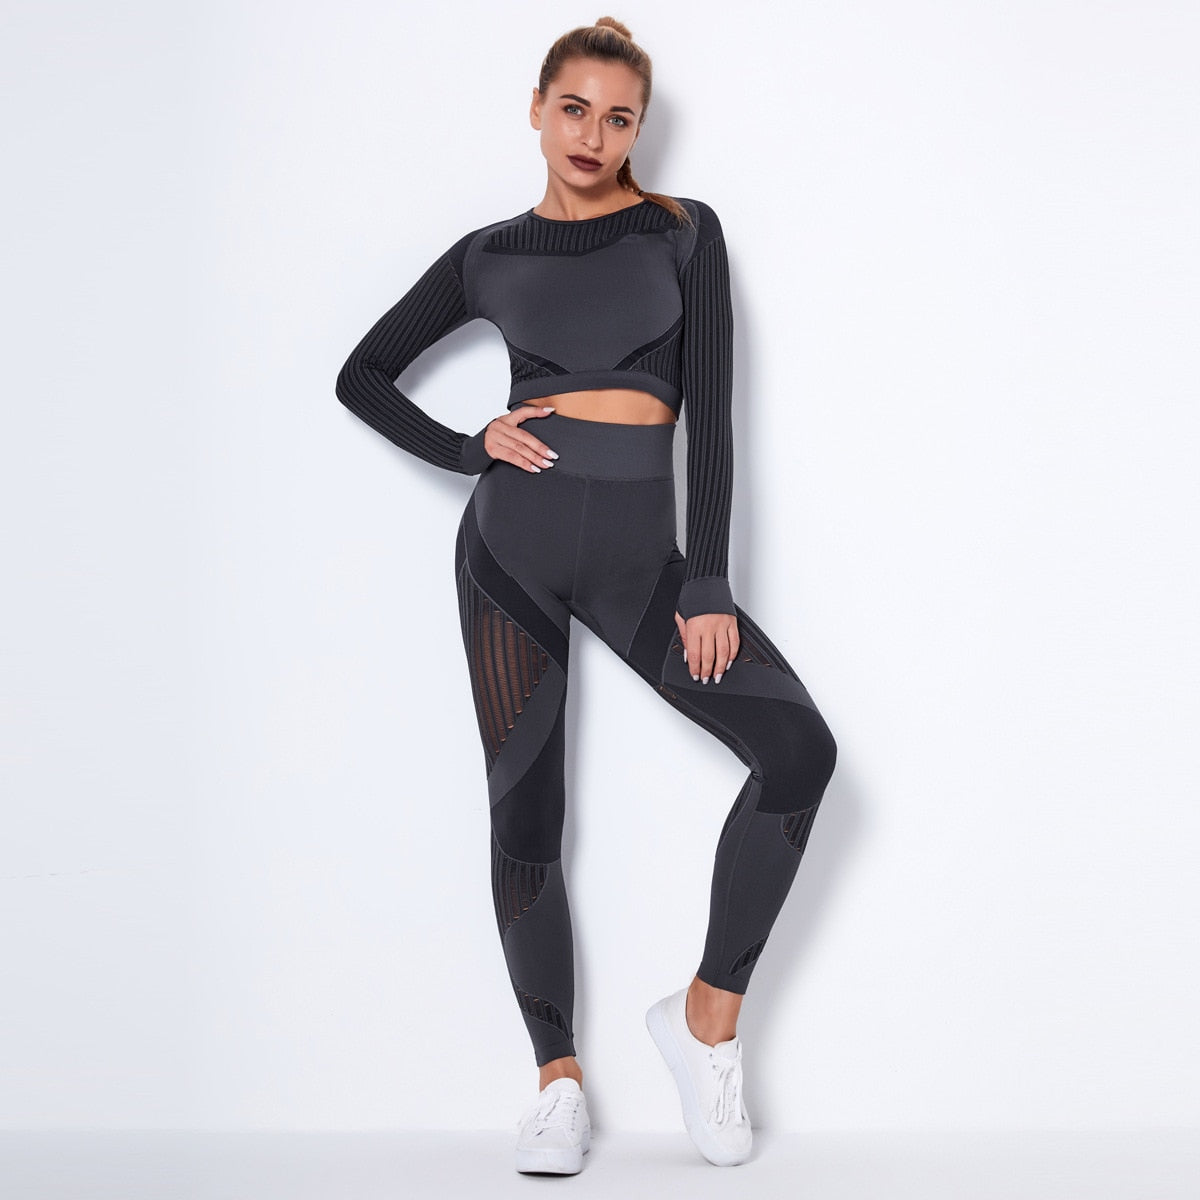 Workout Sets For Women 2 Piece Seamless Yoga Outfit Tracksuit High Waisted Yoga Leggings And Crop Top Gym Clothes Set DarkGrayL  109.99 EZYSELLA SHOP